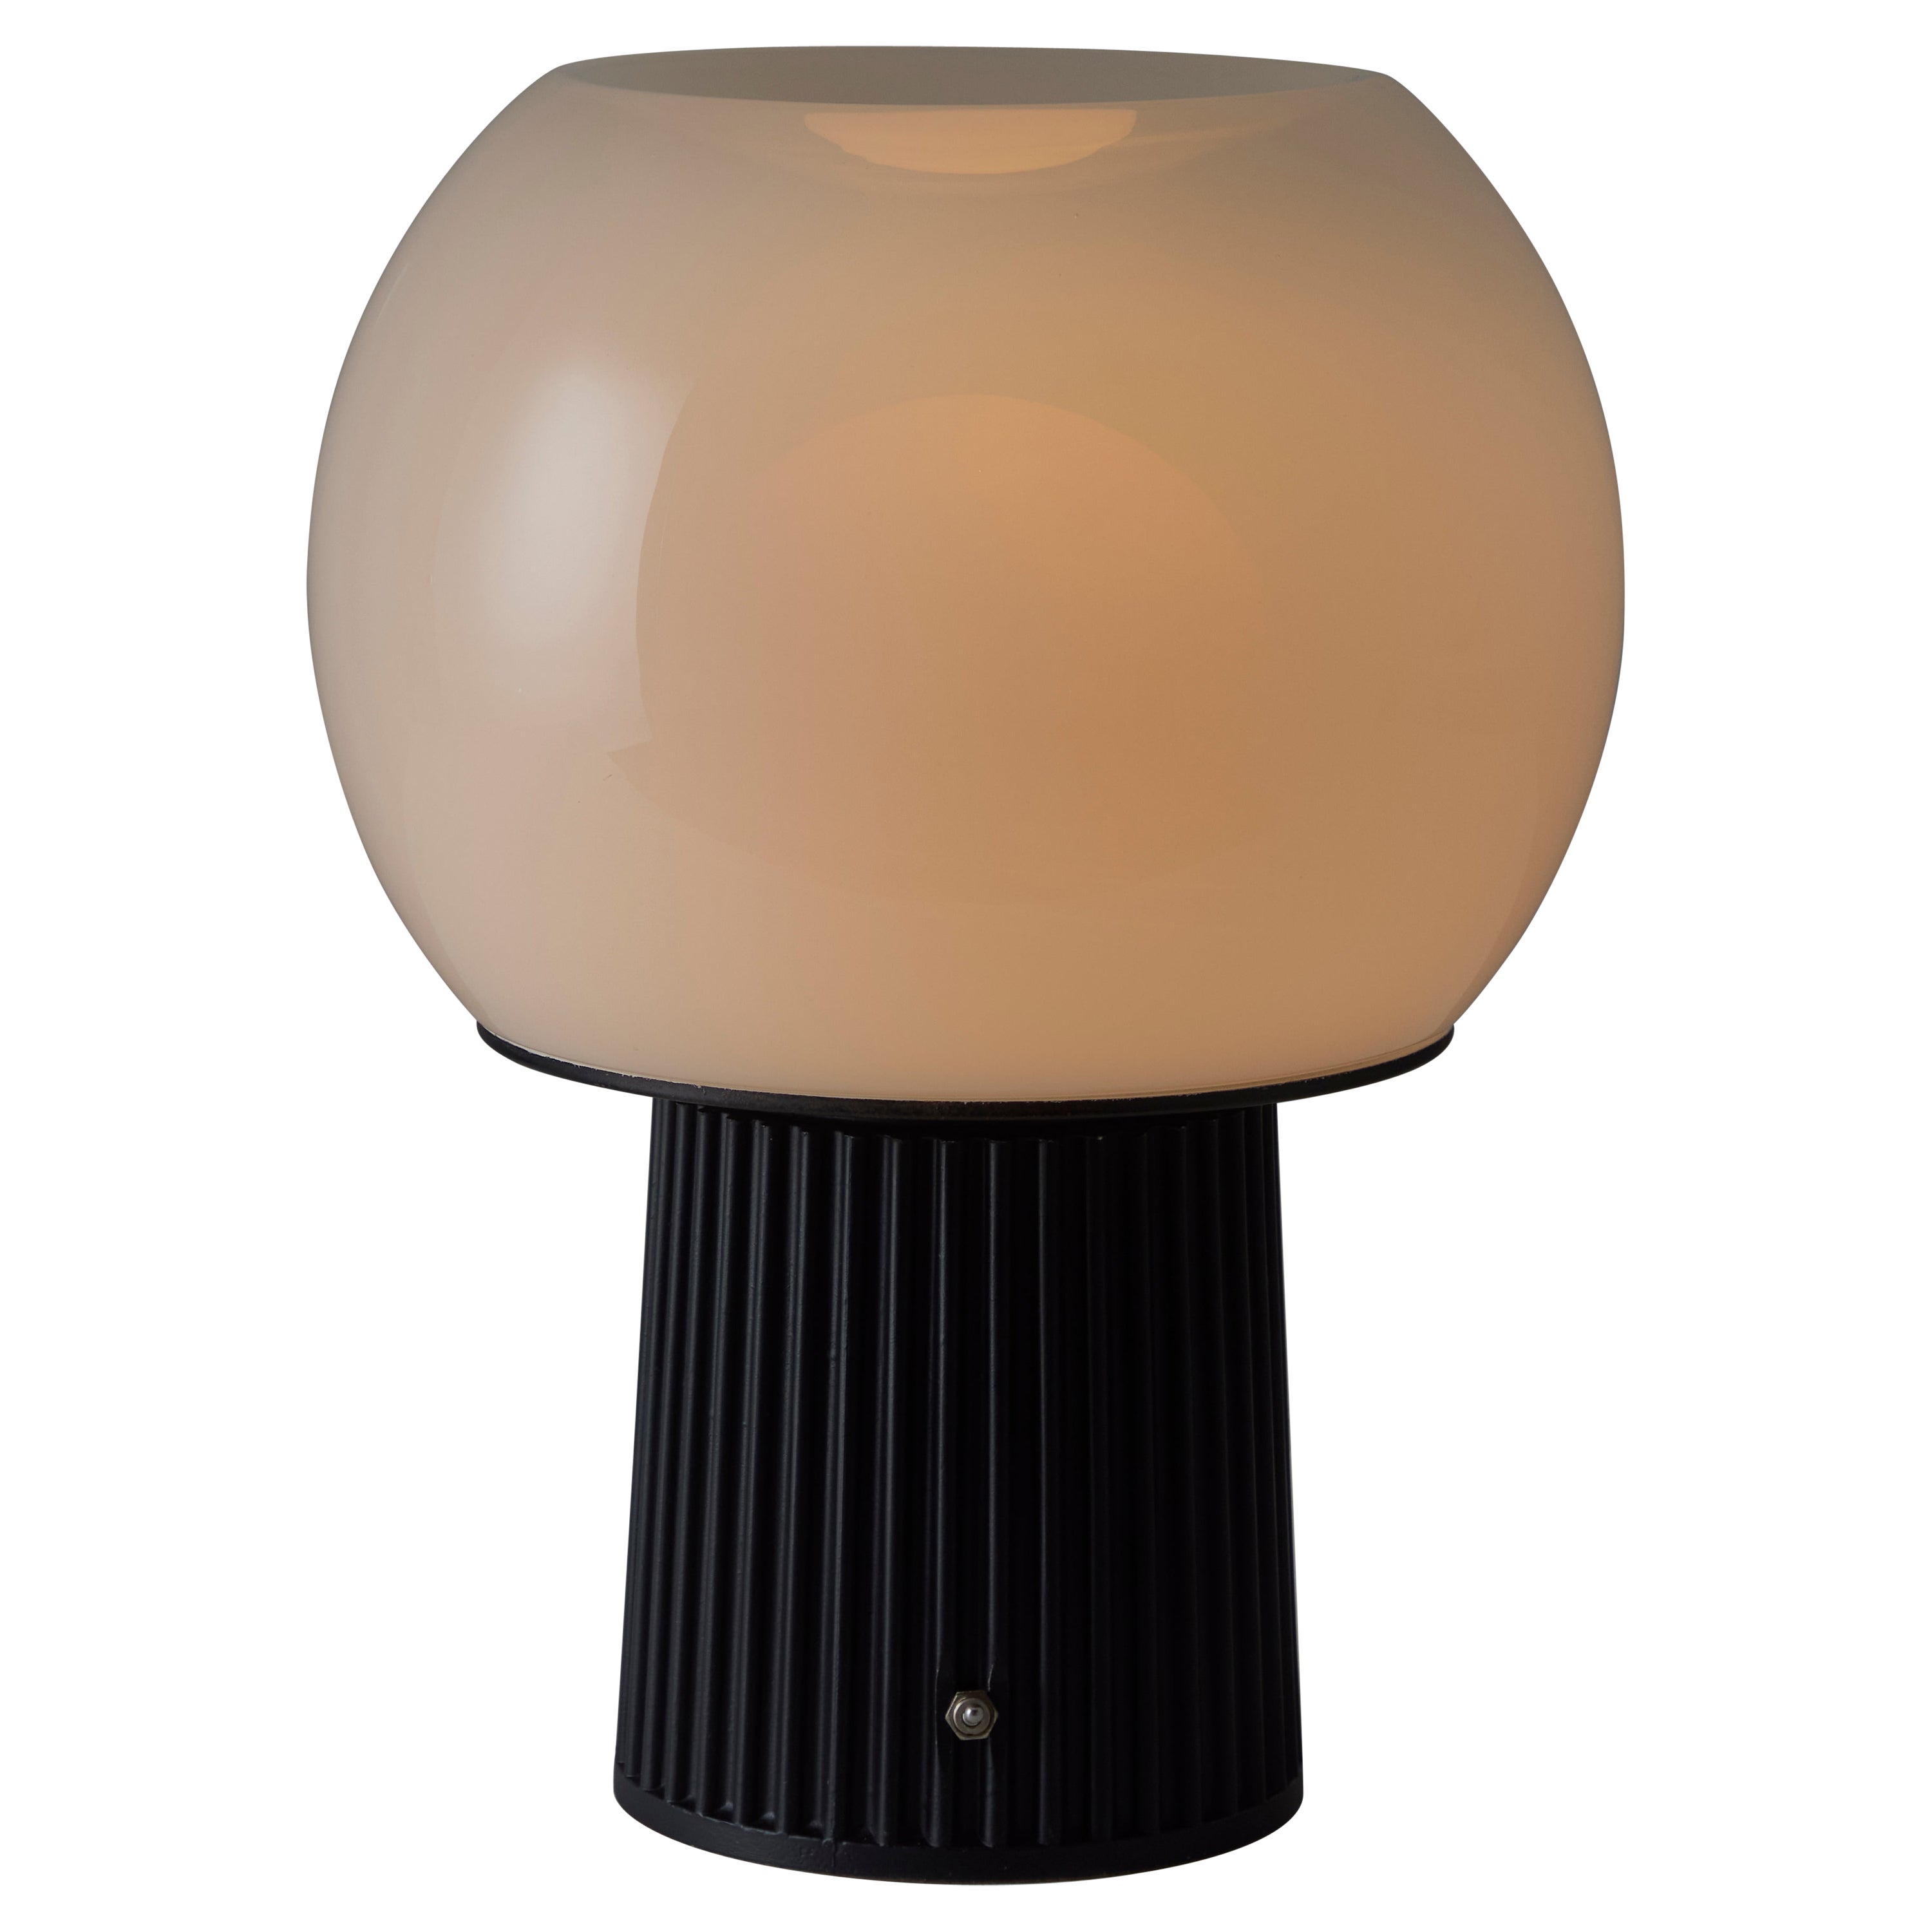 Model D573 Table Lamp by Candle